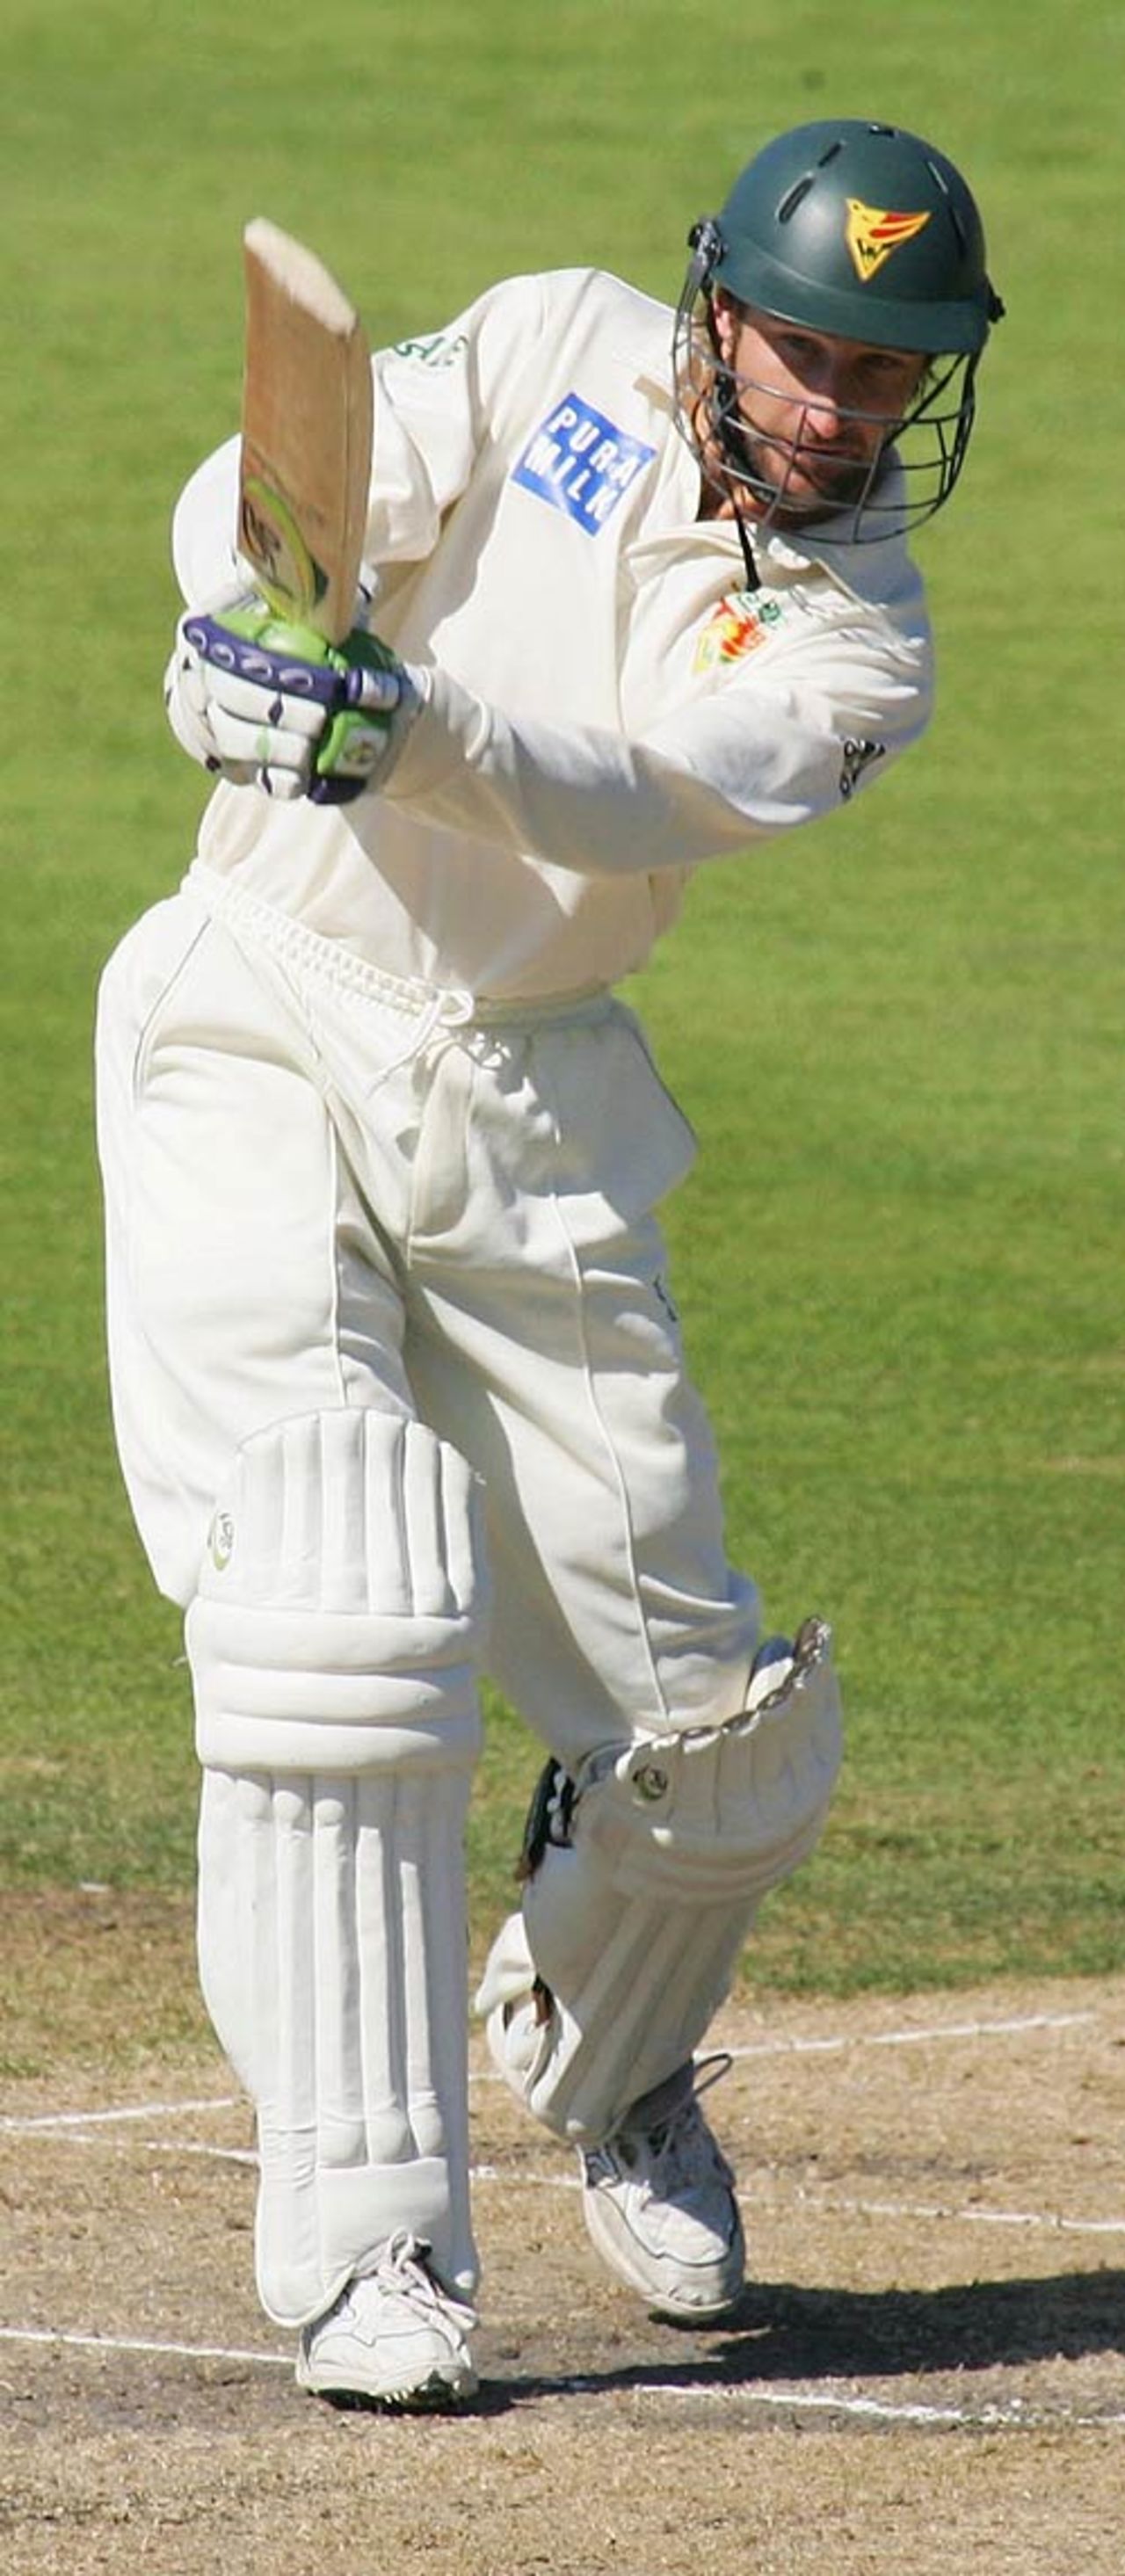 Sean Clingeleffer drives on his way to a half-century, Tasmania v New South Wales, Pura Cup final, Hobart, March 22, 2007